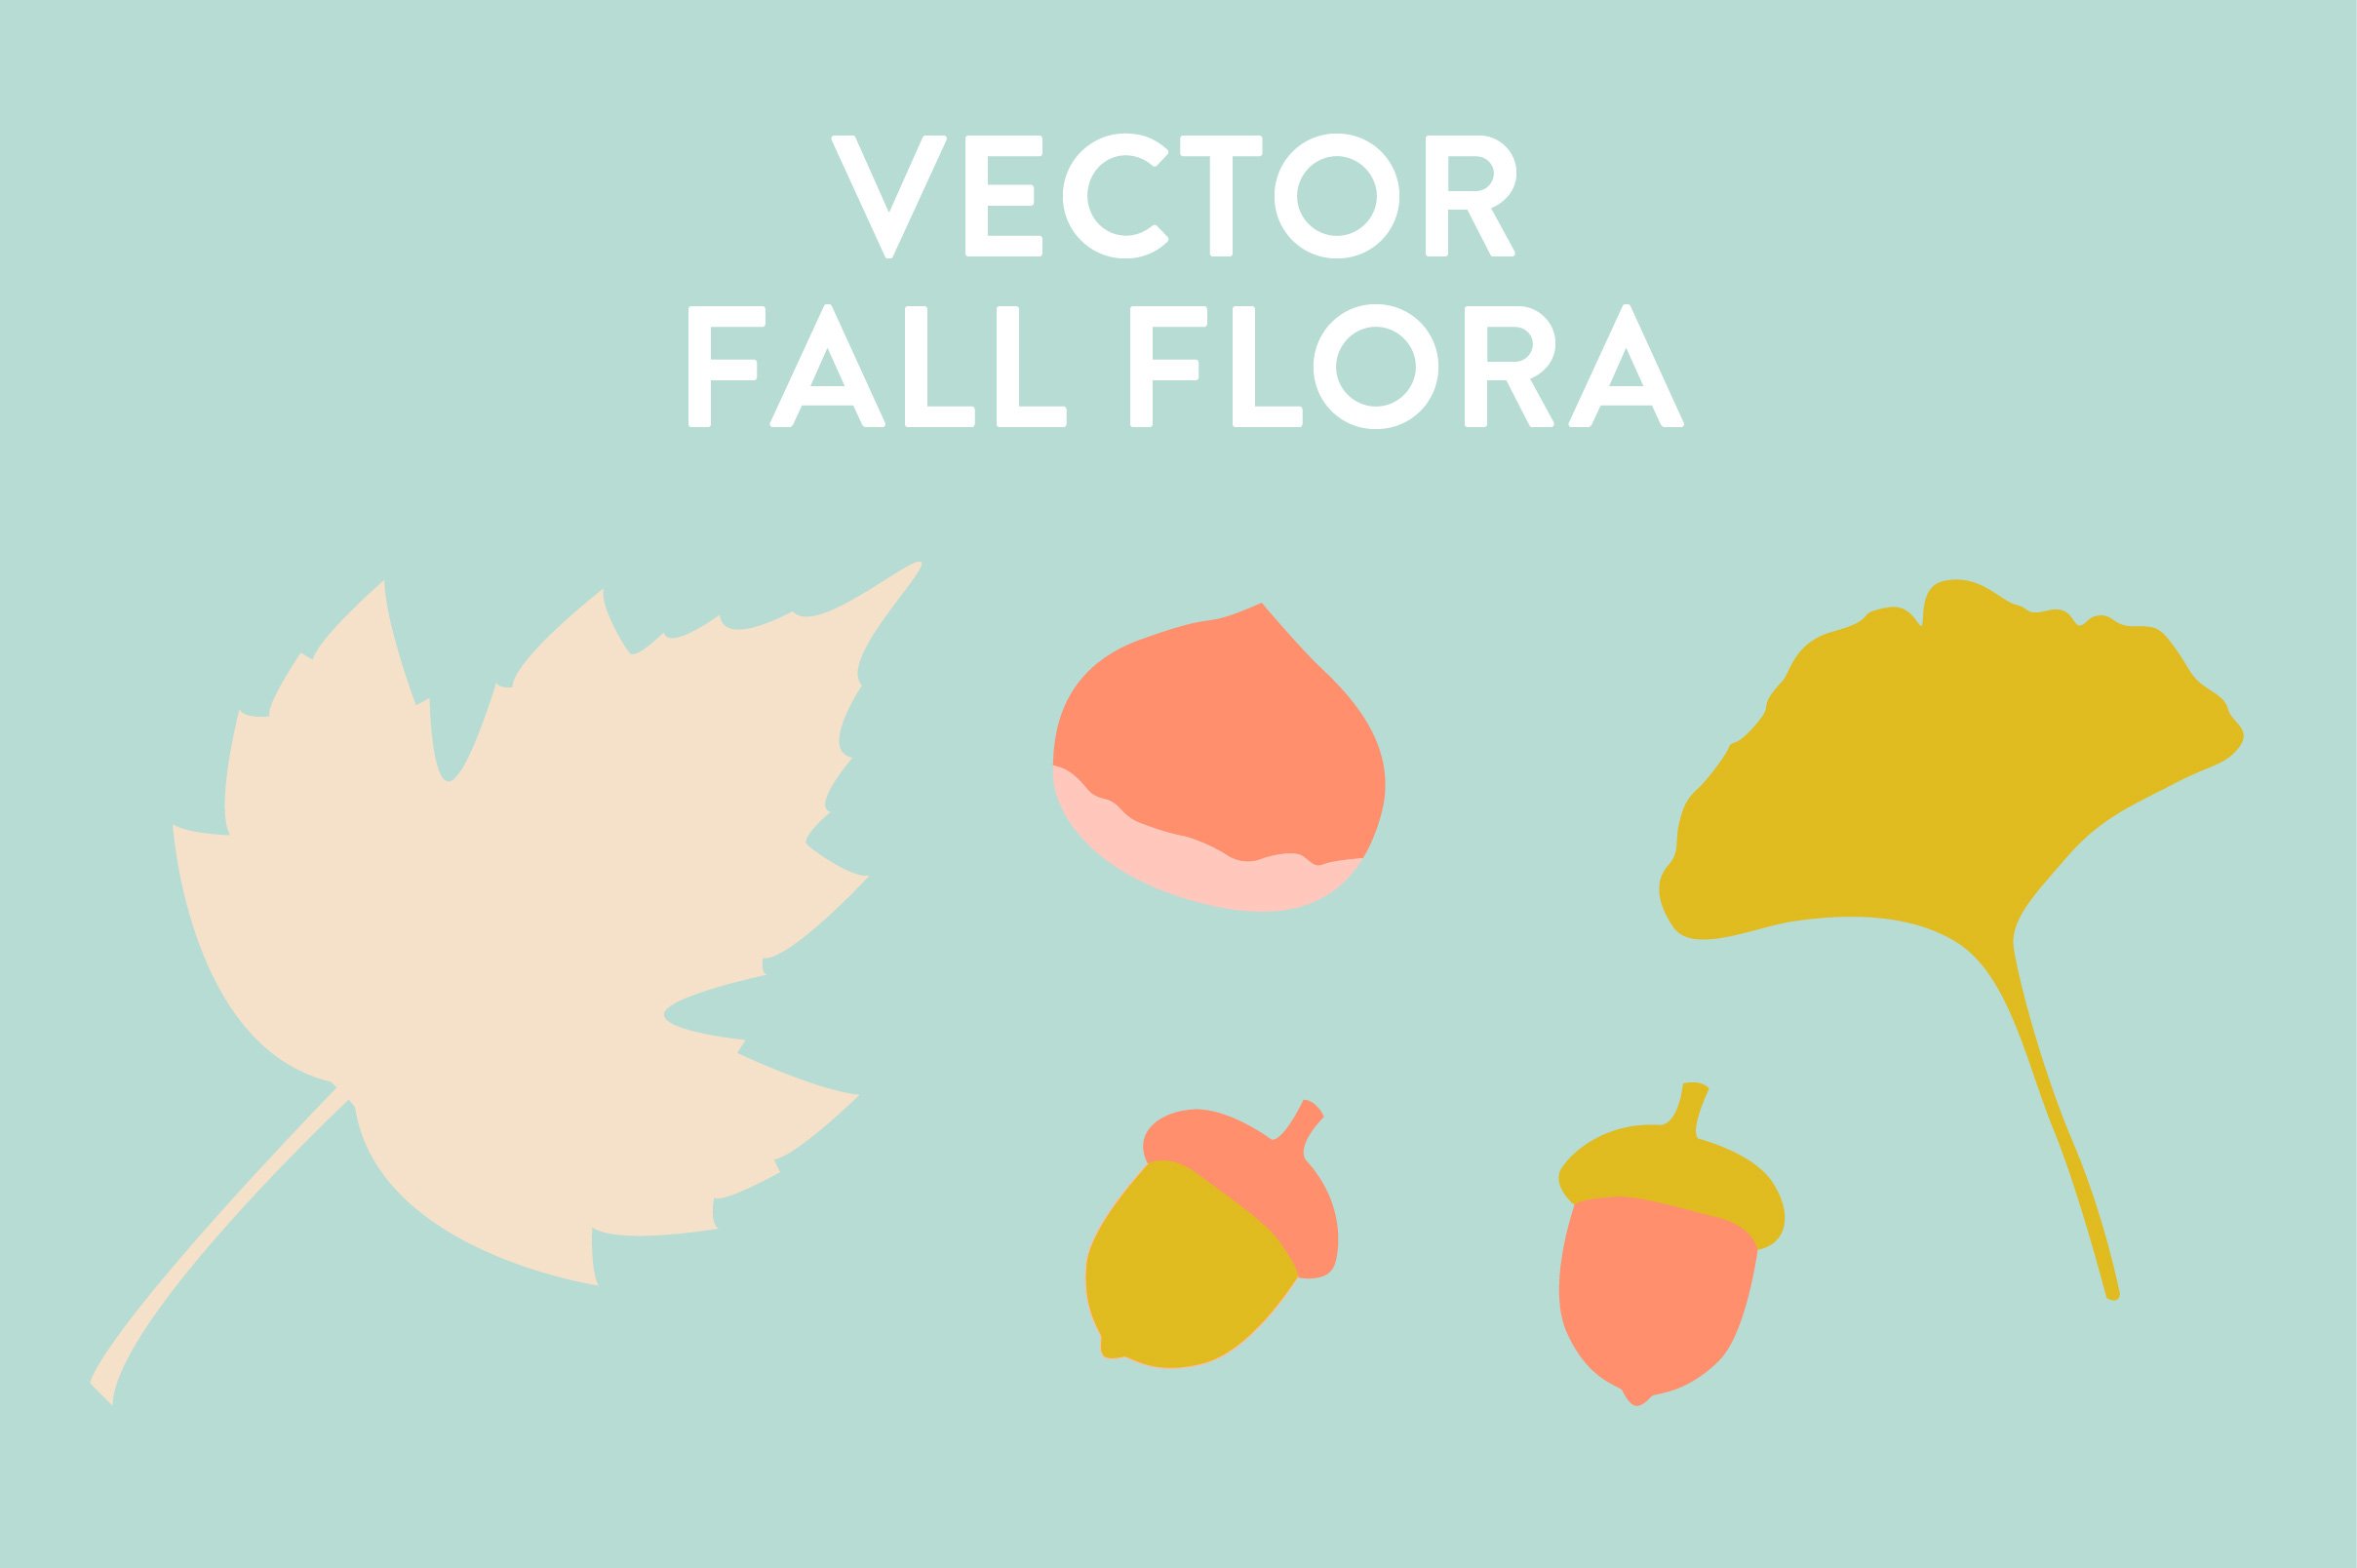 Vector Fall Flora cover image.